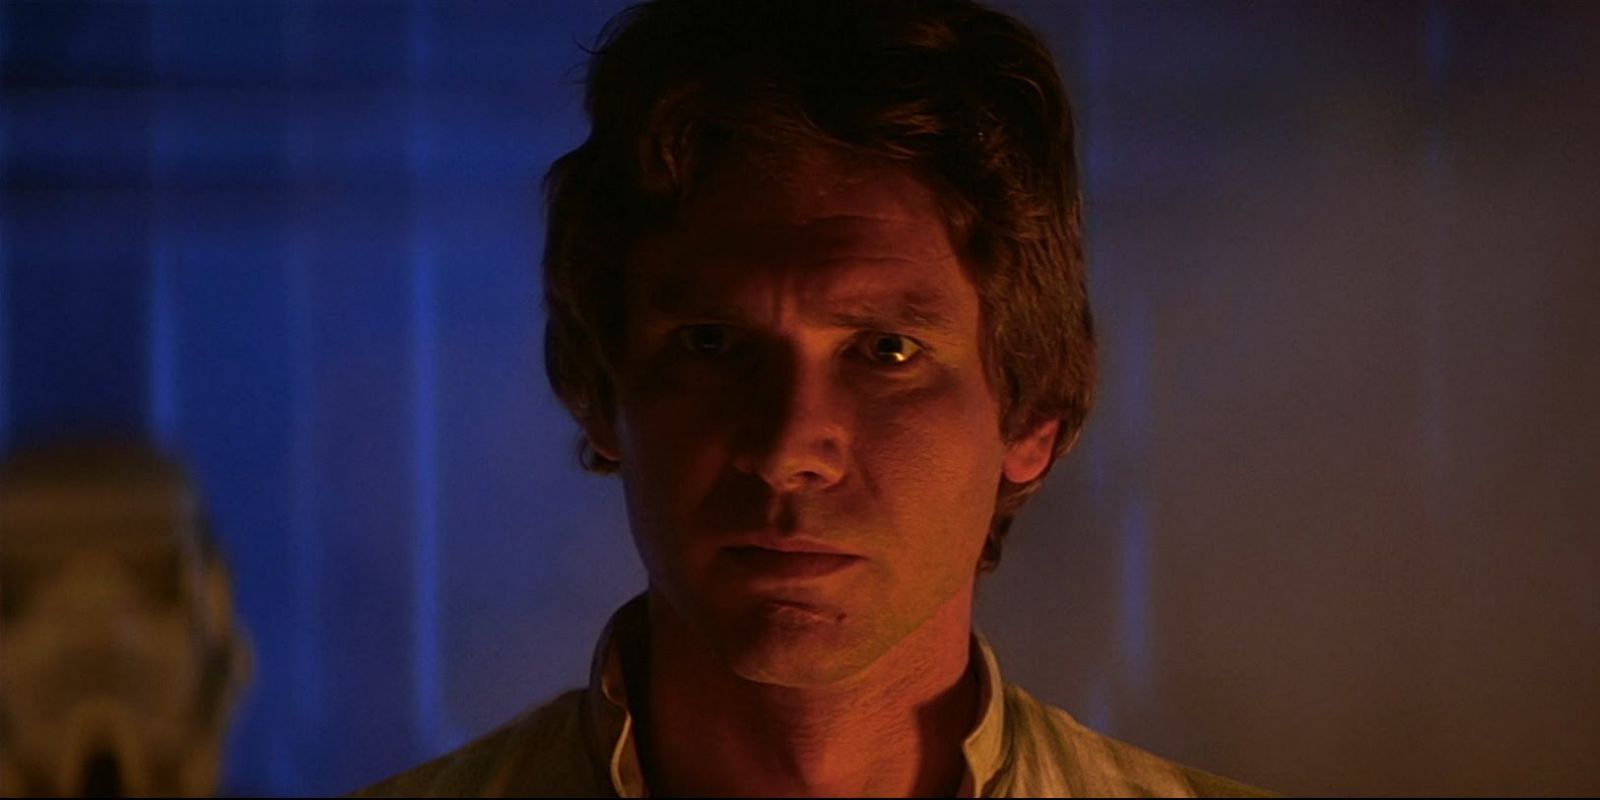 Han Solo says 'I know' in The Empire Strikes Back